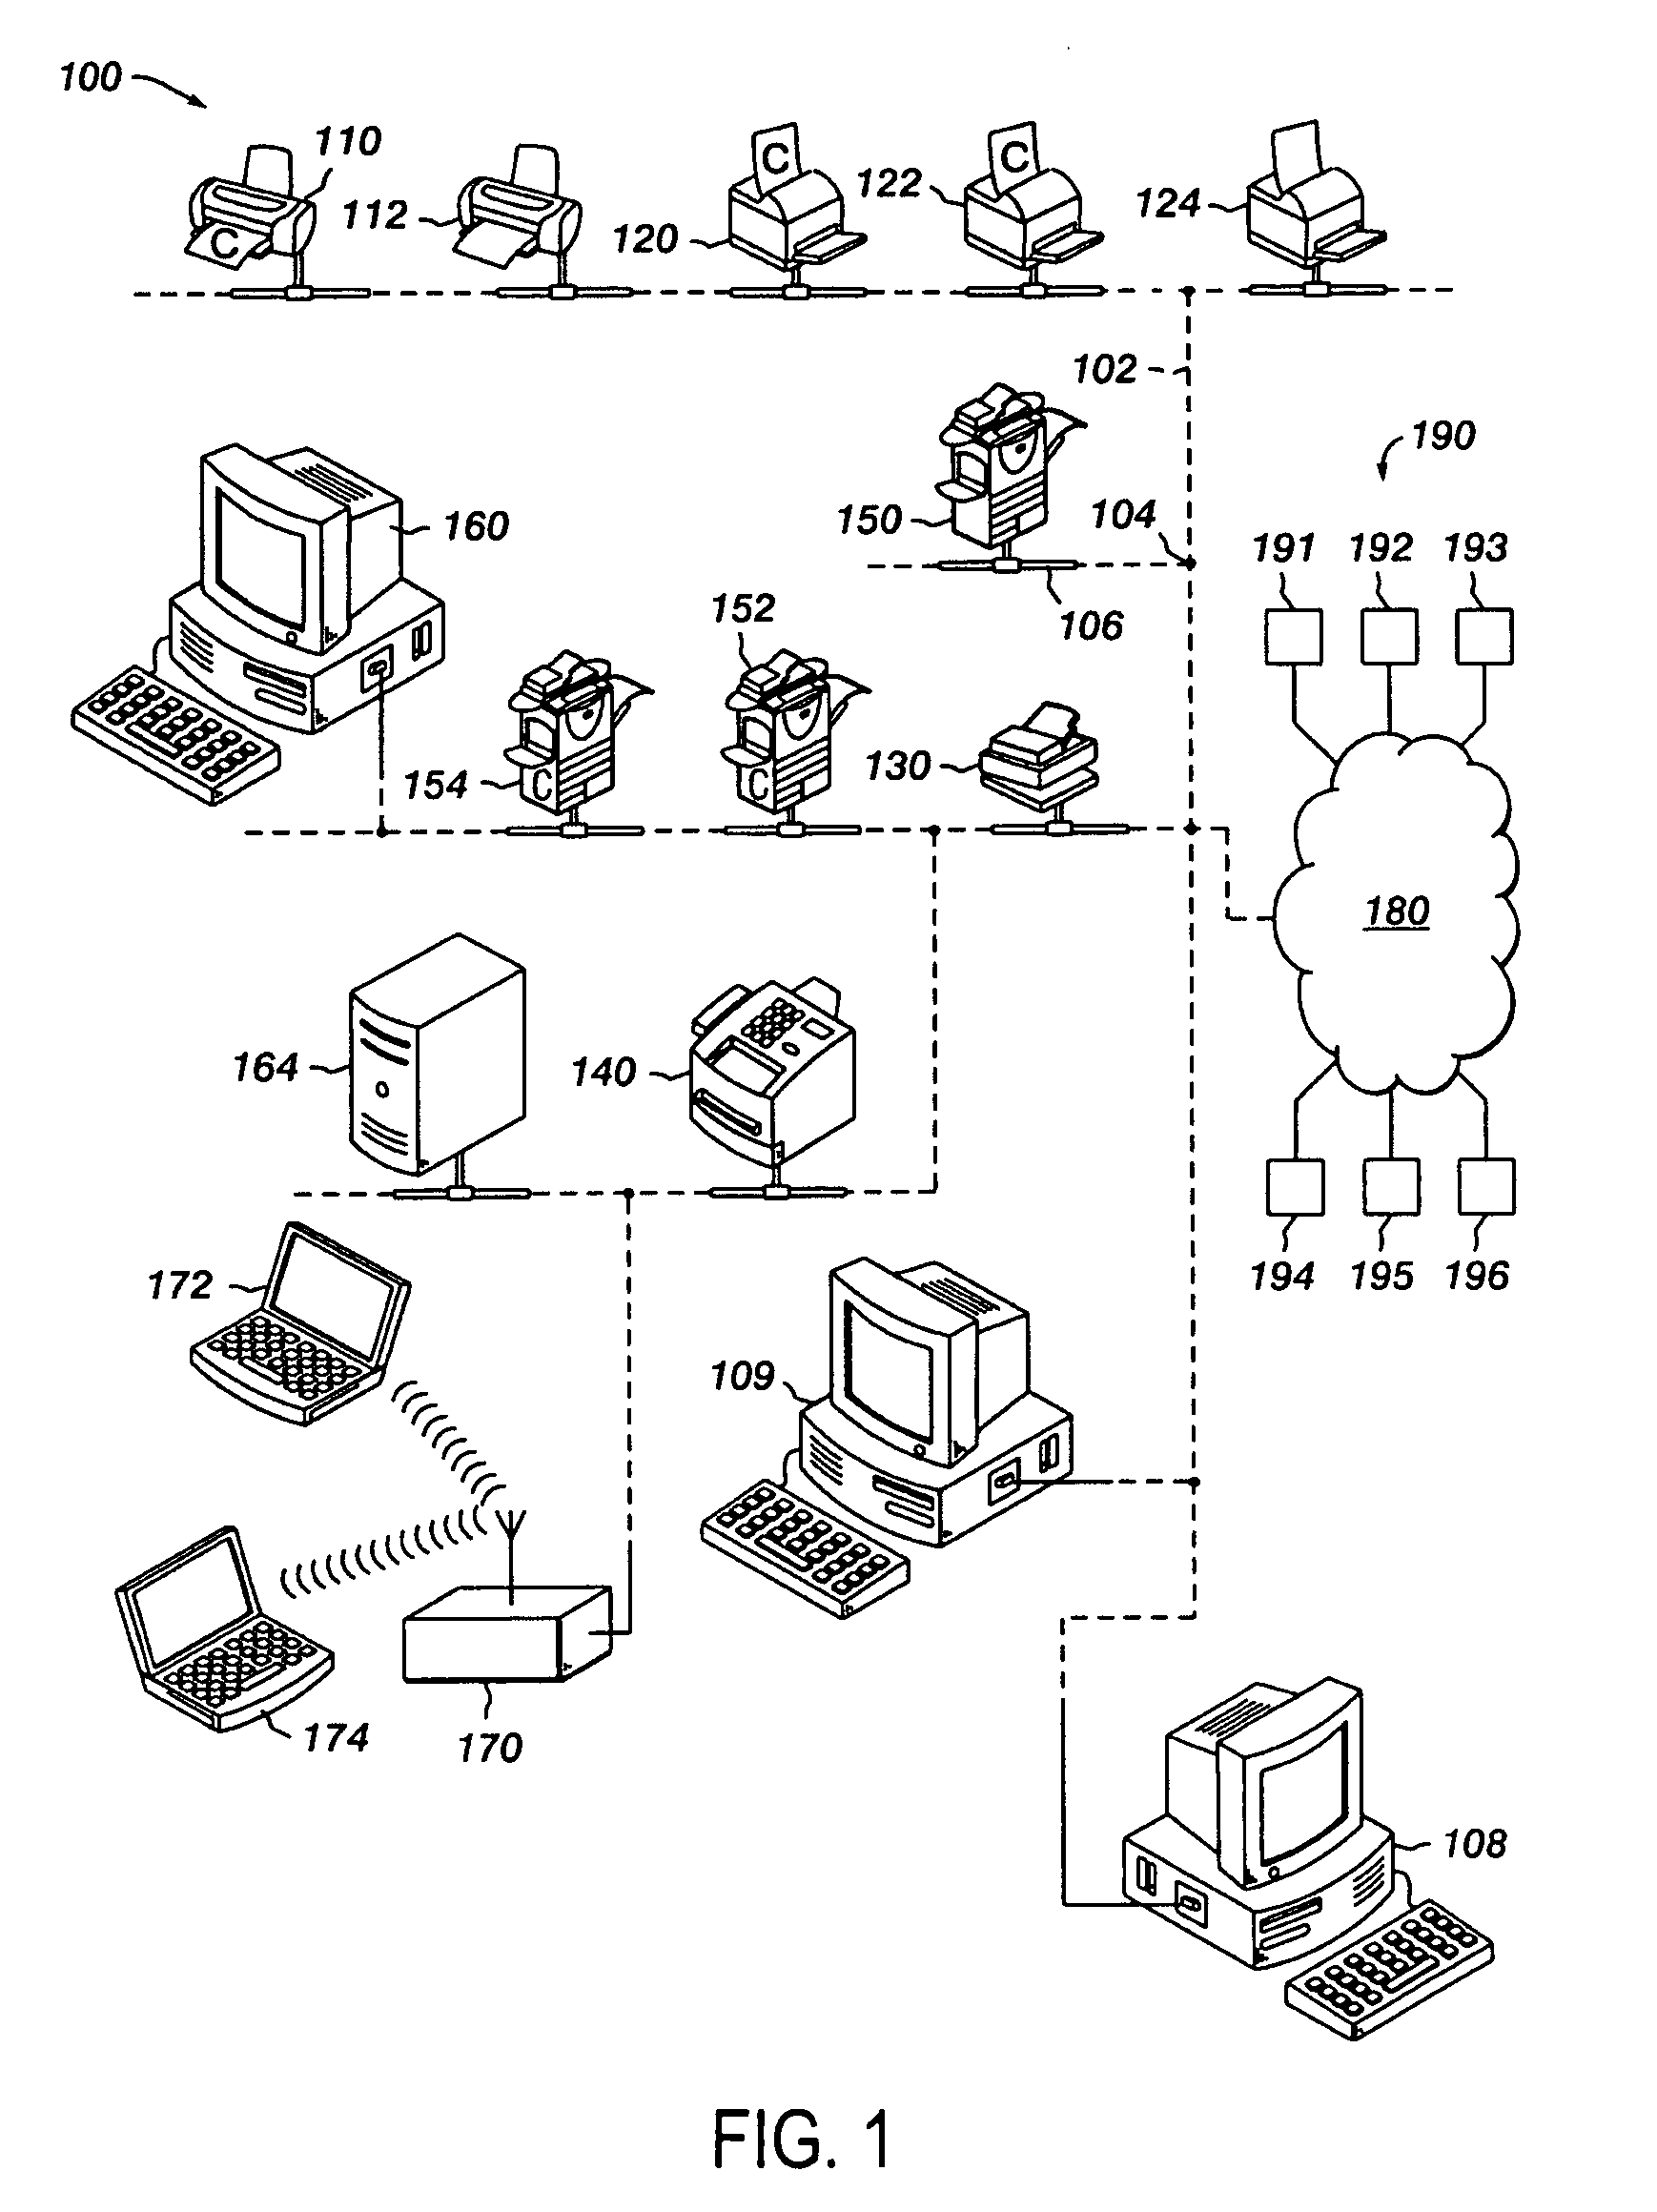 System and method for finding stable keypoints in a picture image using localized scale space properties